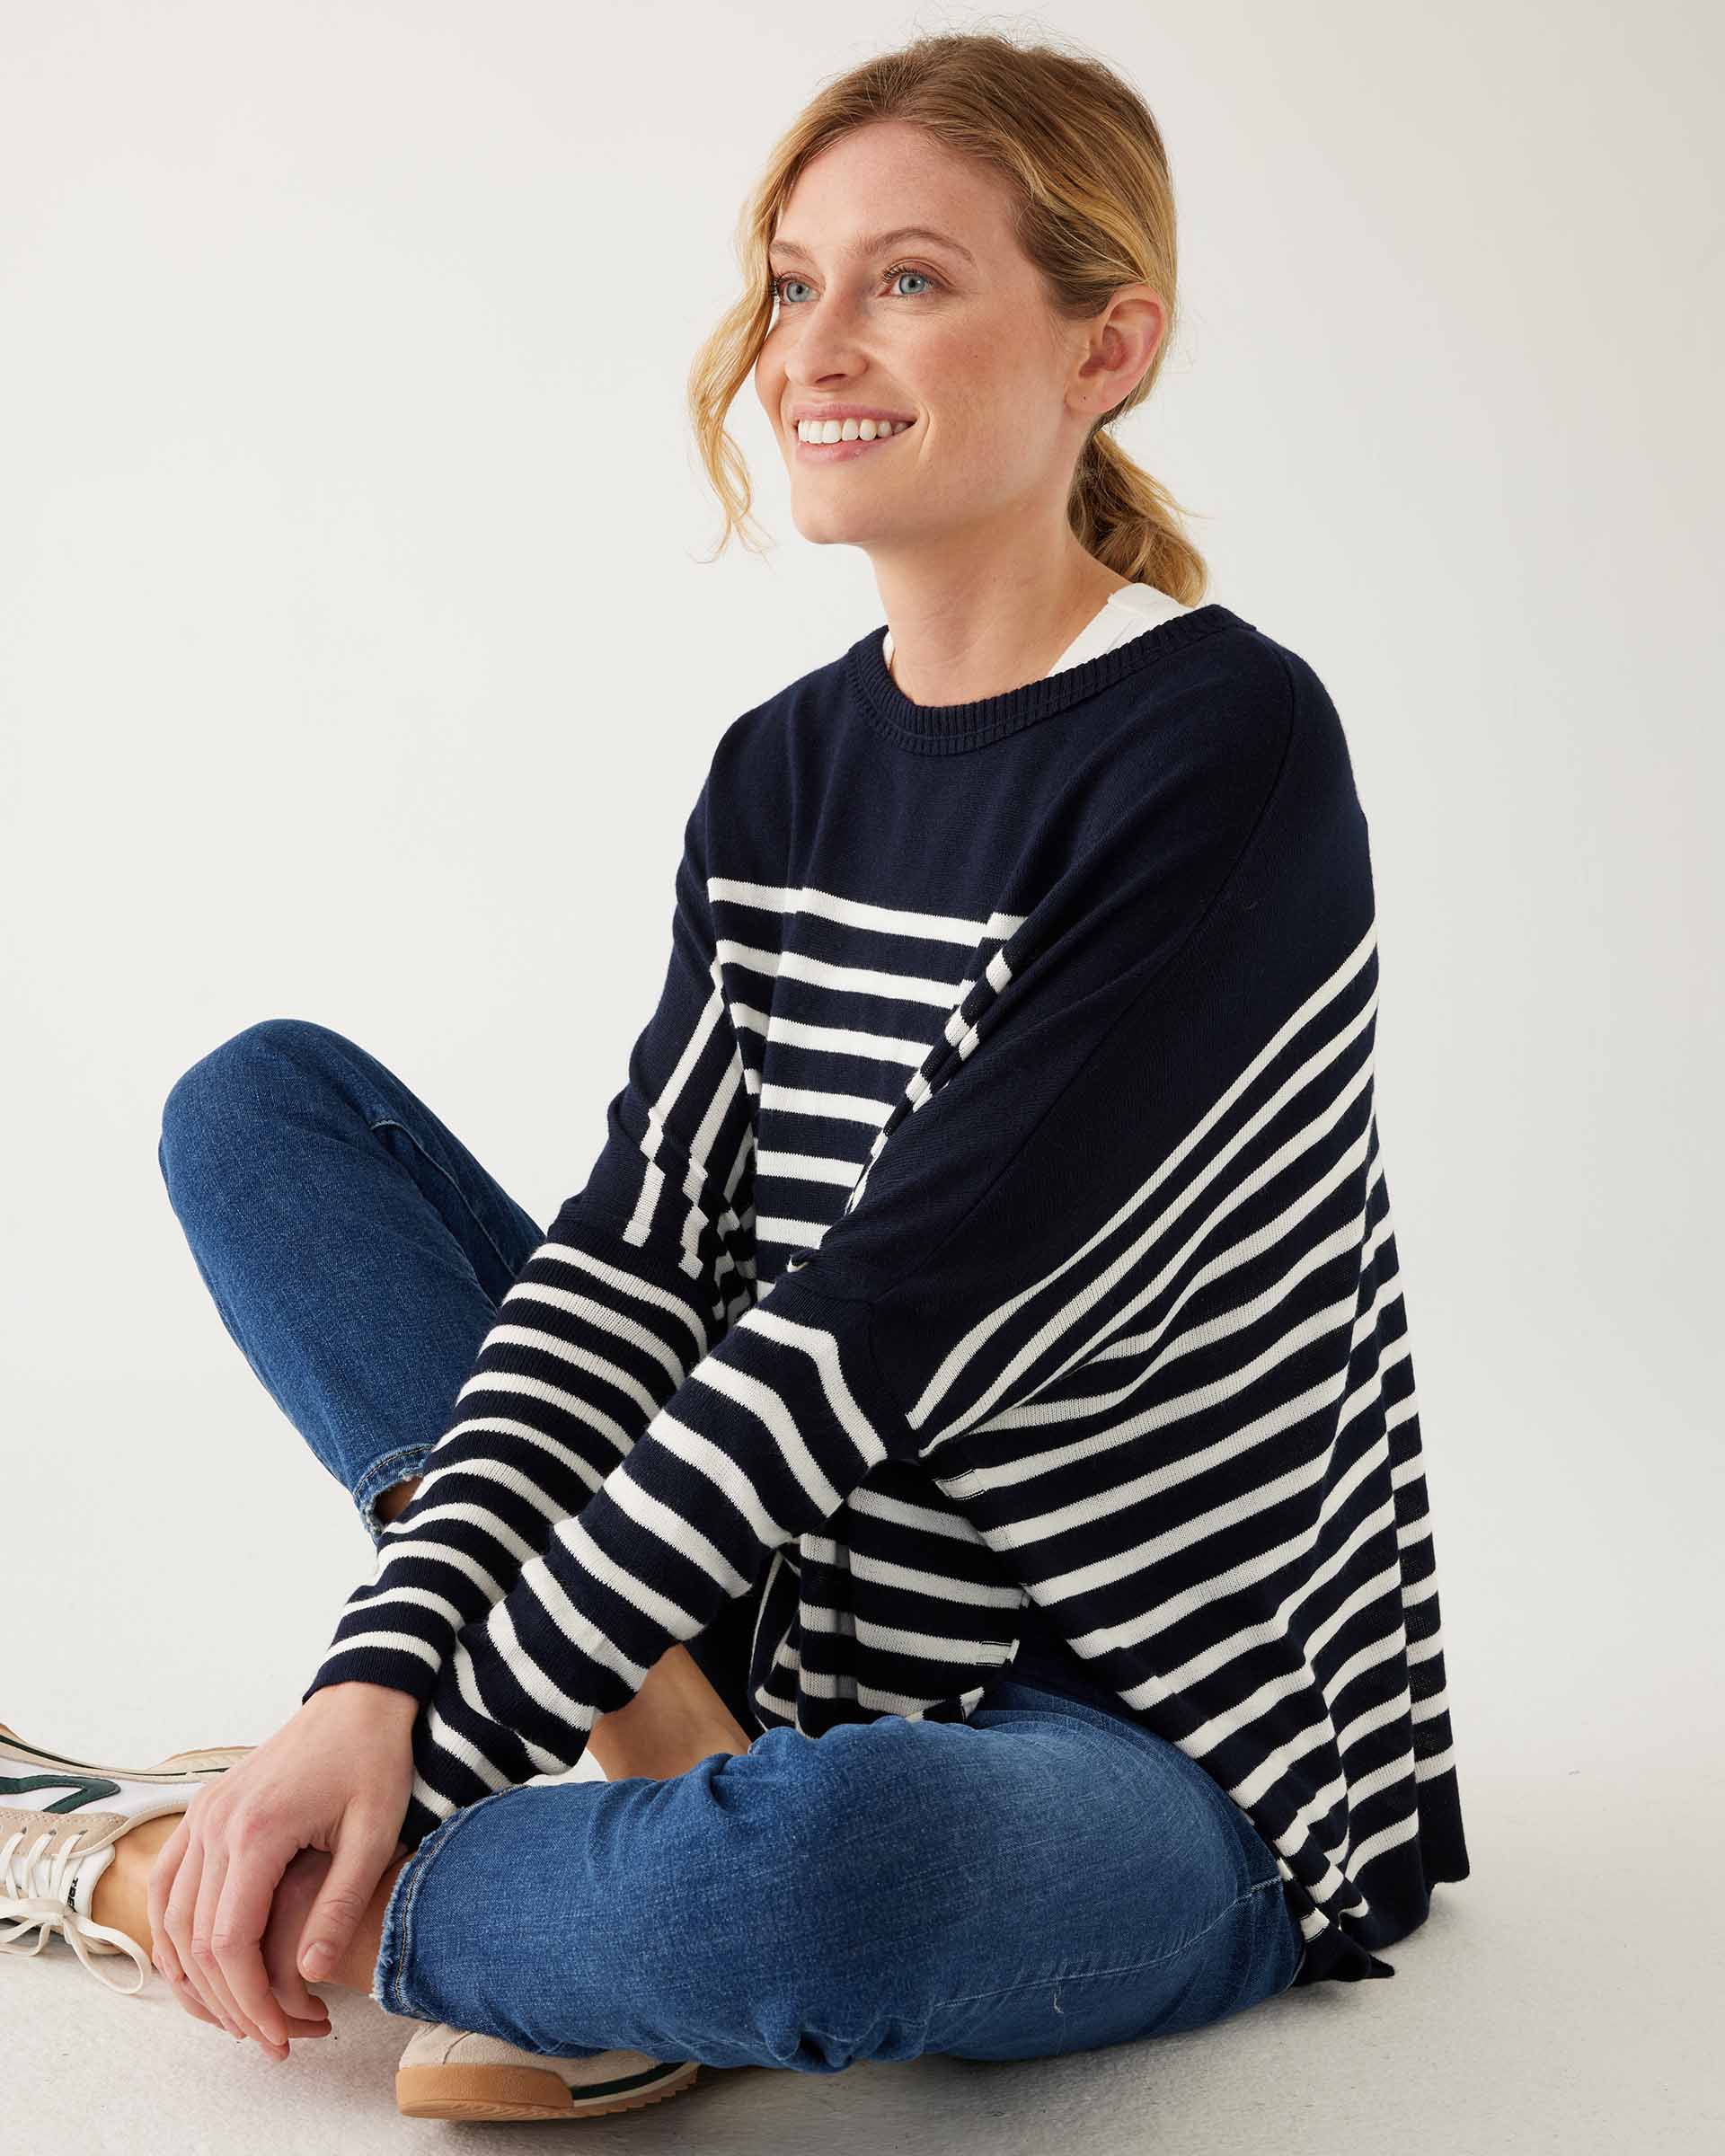 female wearing navy and white striped sweater with blue jeans sitting on a white background